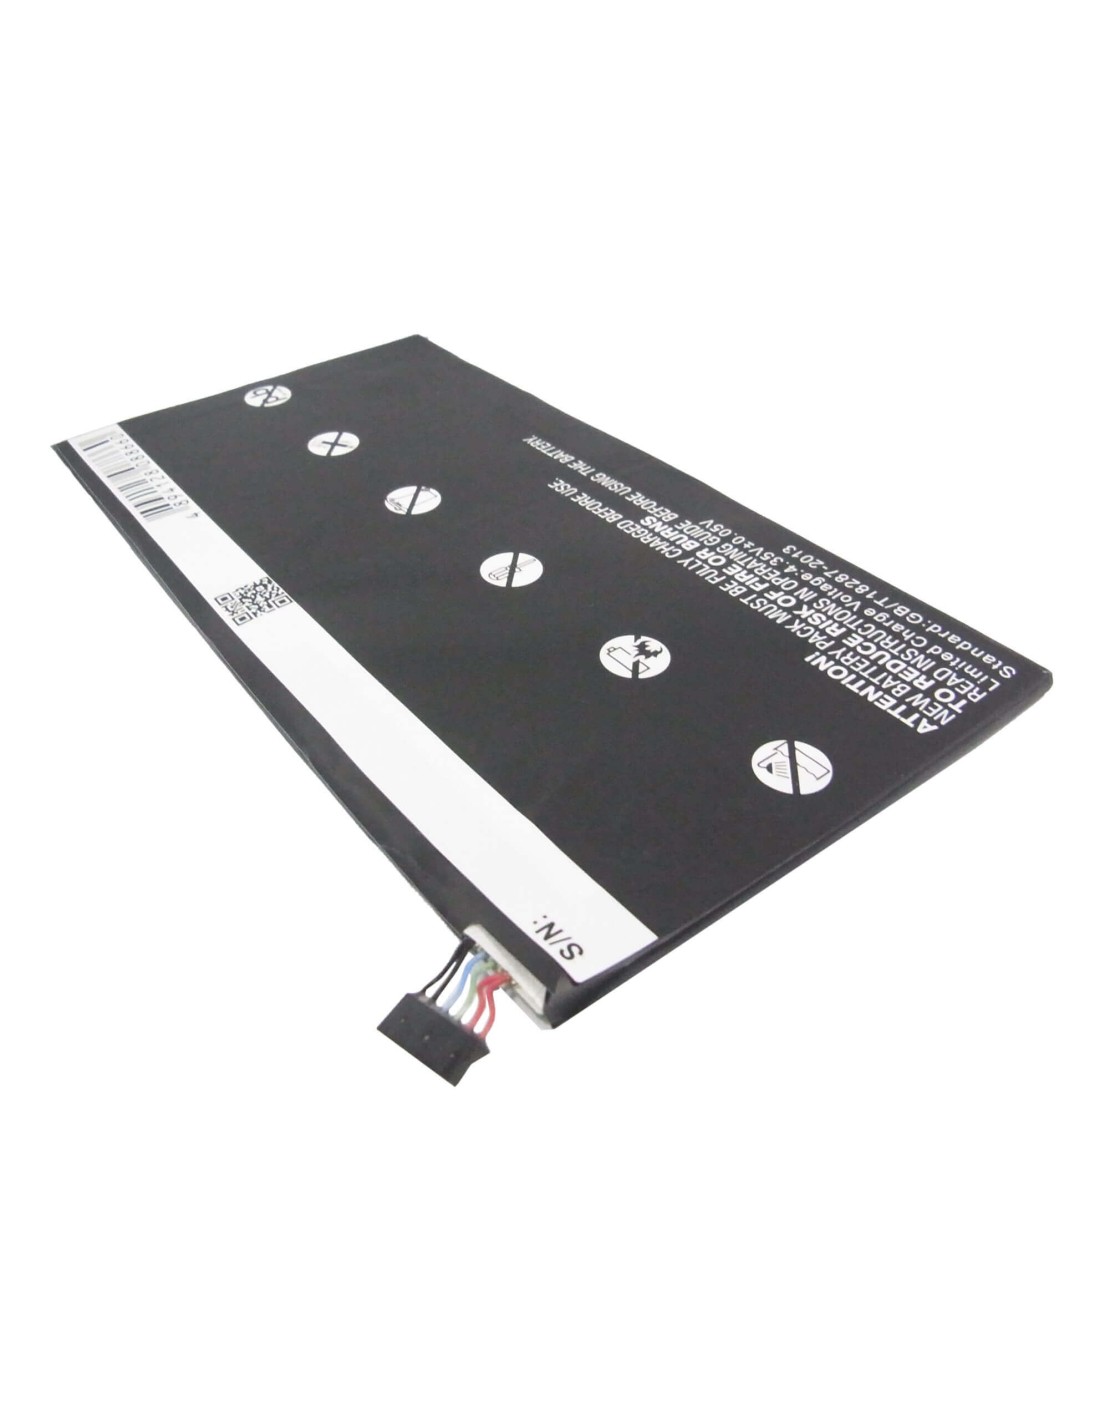 Battery for Asus Transformer Book T100, Transformer Book T100t, Transformer Book T100ta 3.8V, 8150mAh - 30.97Wh